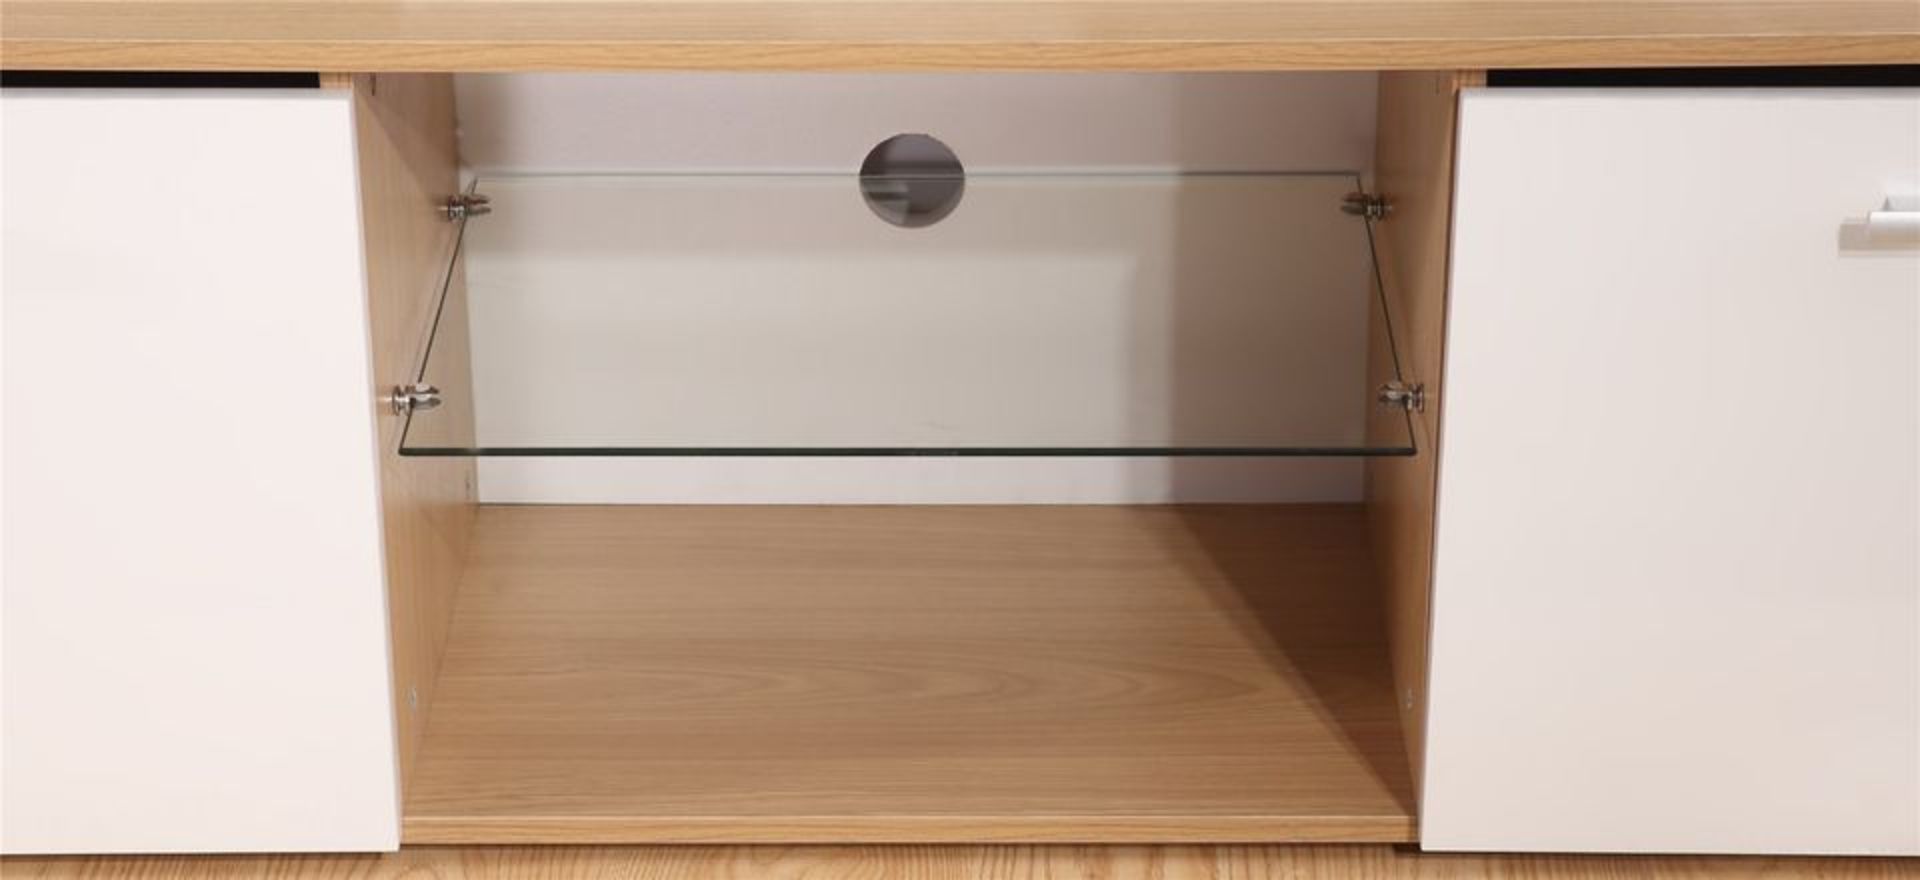 BRAND NEW 160CM WHITE ON OAK TV STAND (TV32) - Image 3 of 7